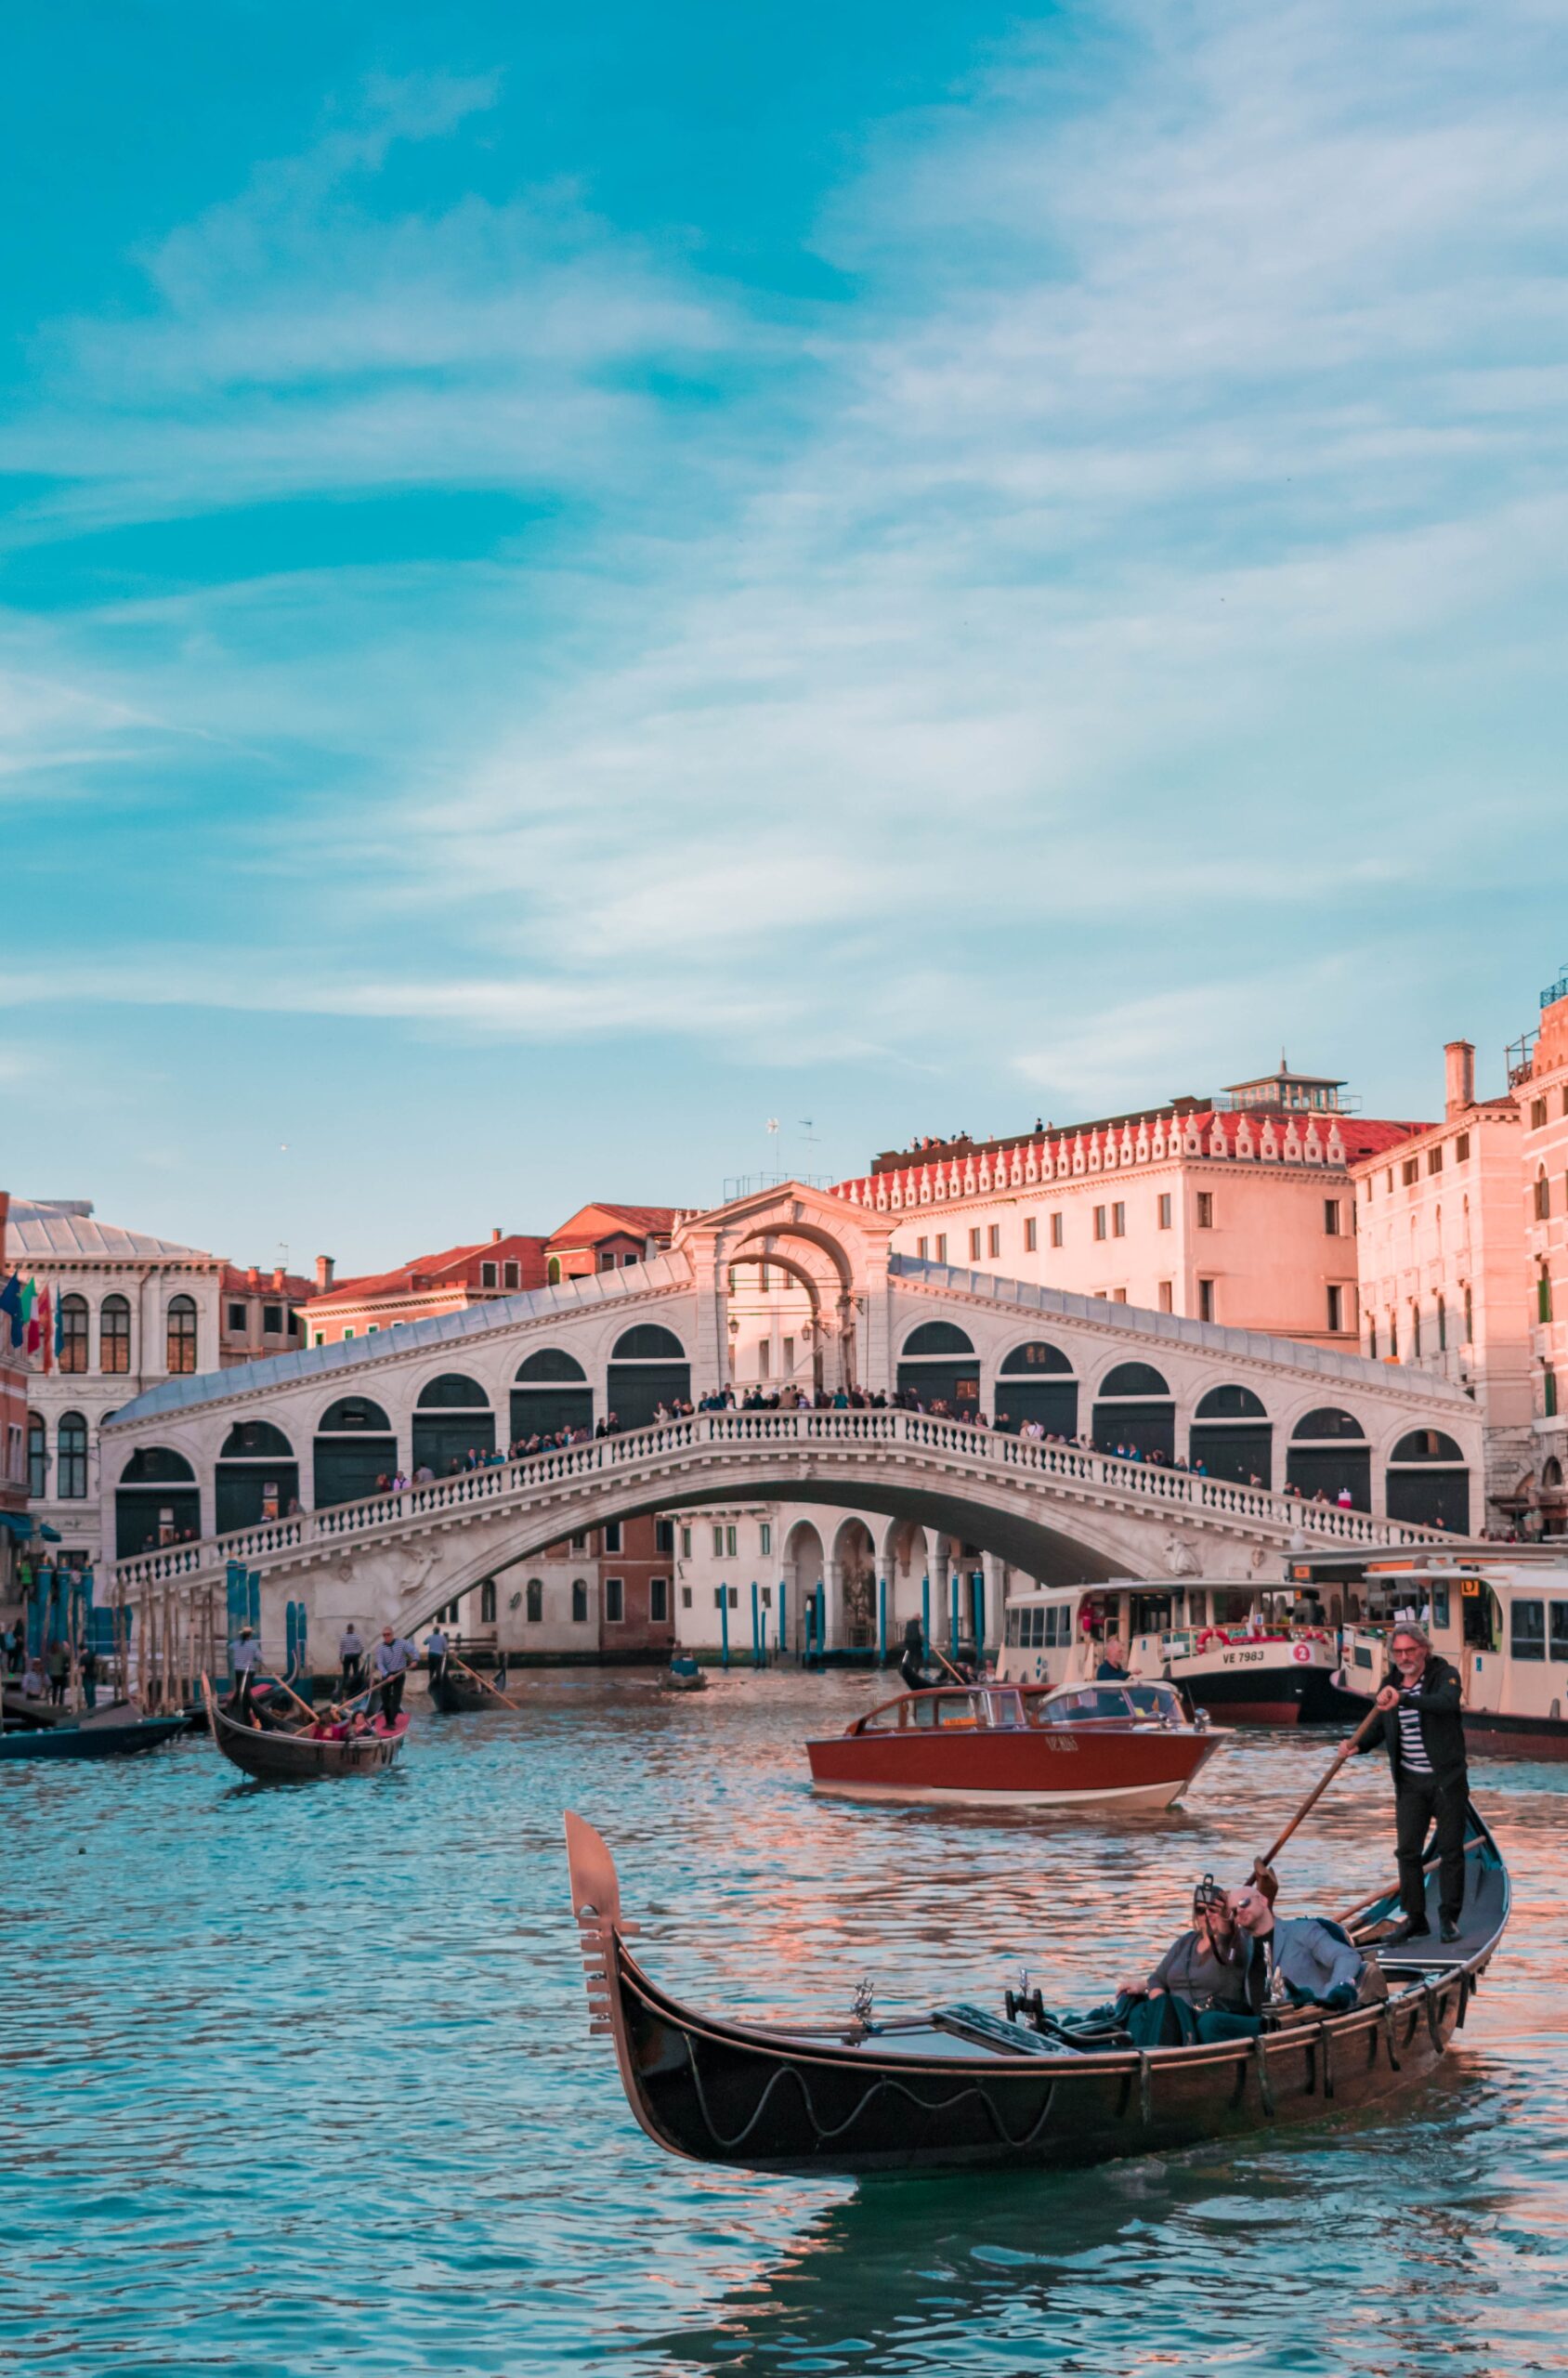 Going on a romantic boat ride in Venice, Italy is one of the popular  things to do in europe